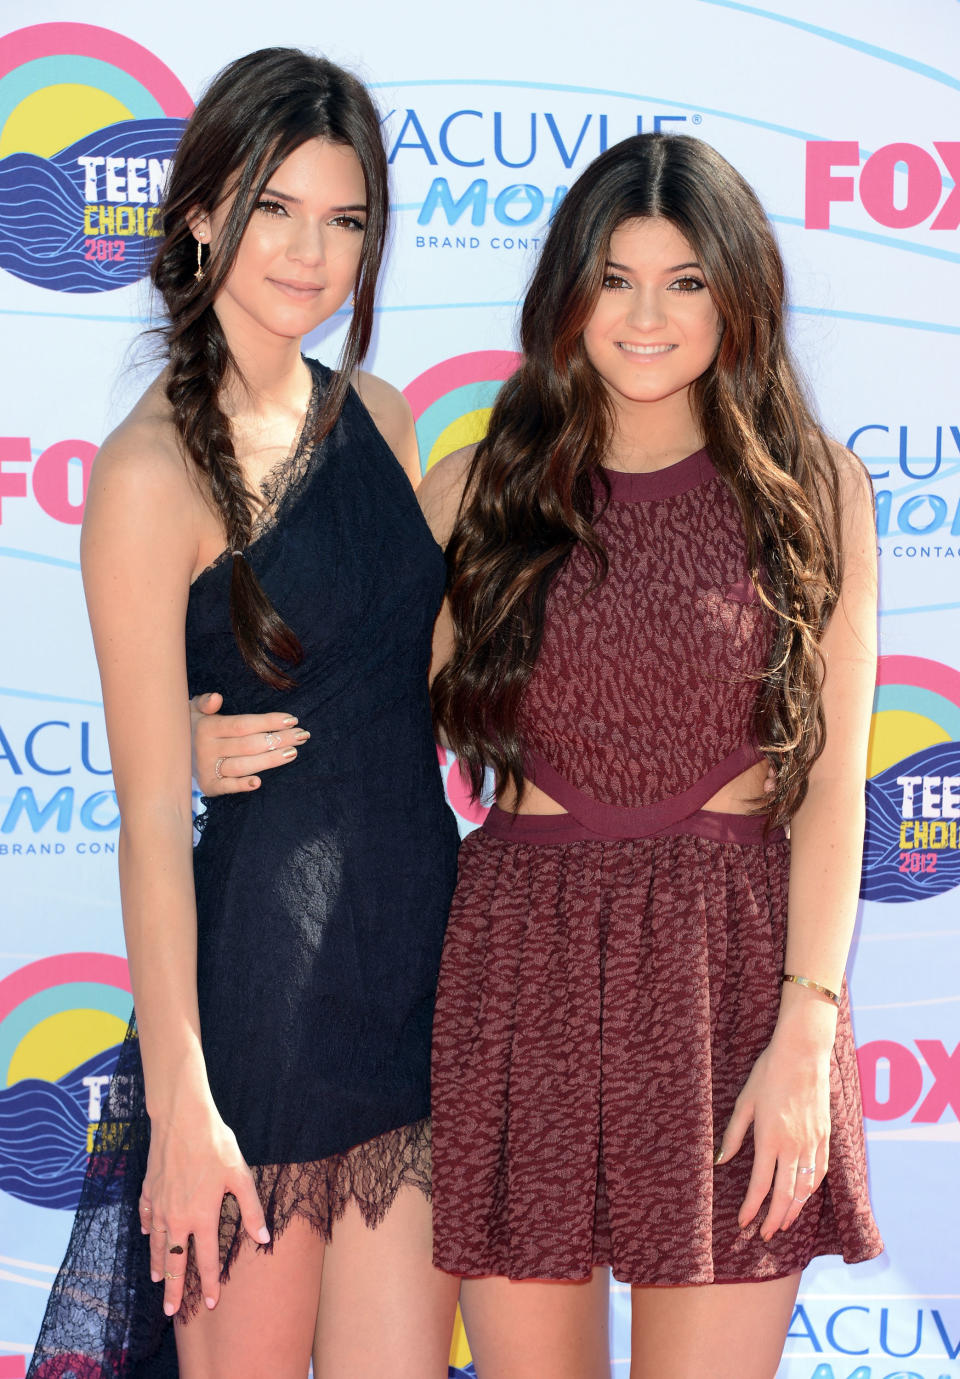 Kendall and Kylie Jenner arrive at the 2012 Teen Choice Awards at Gibson Amphitheatre on July 22, 2012 in Universal City, California.